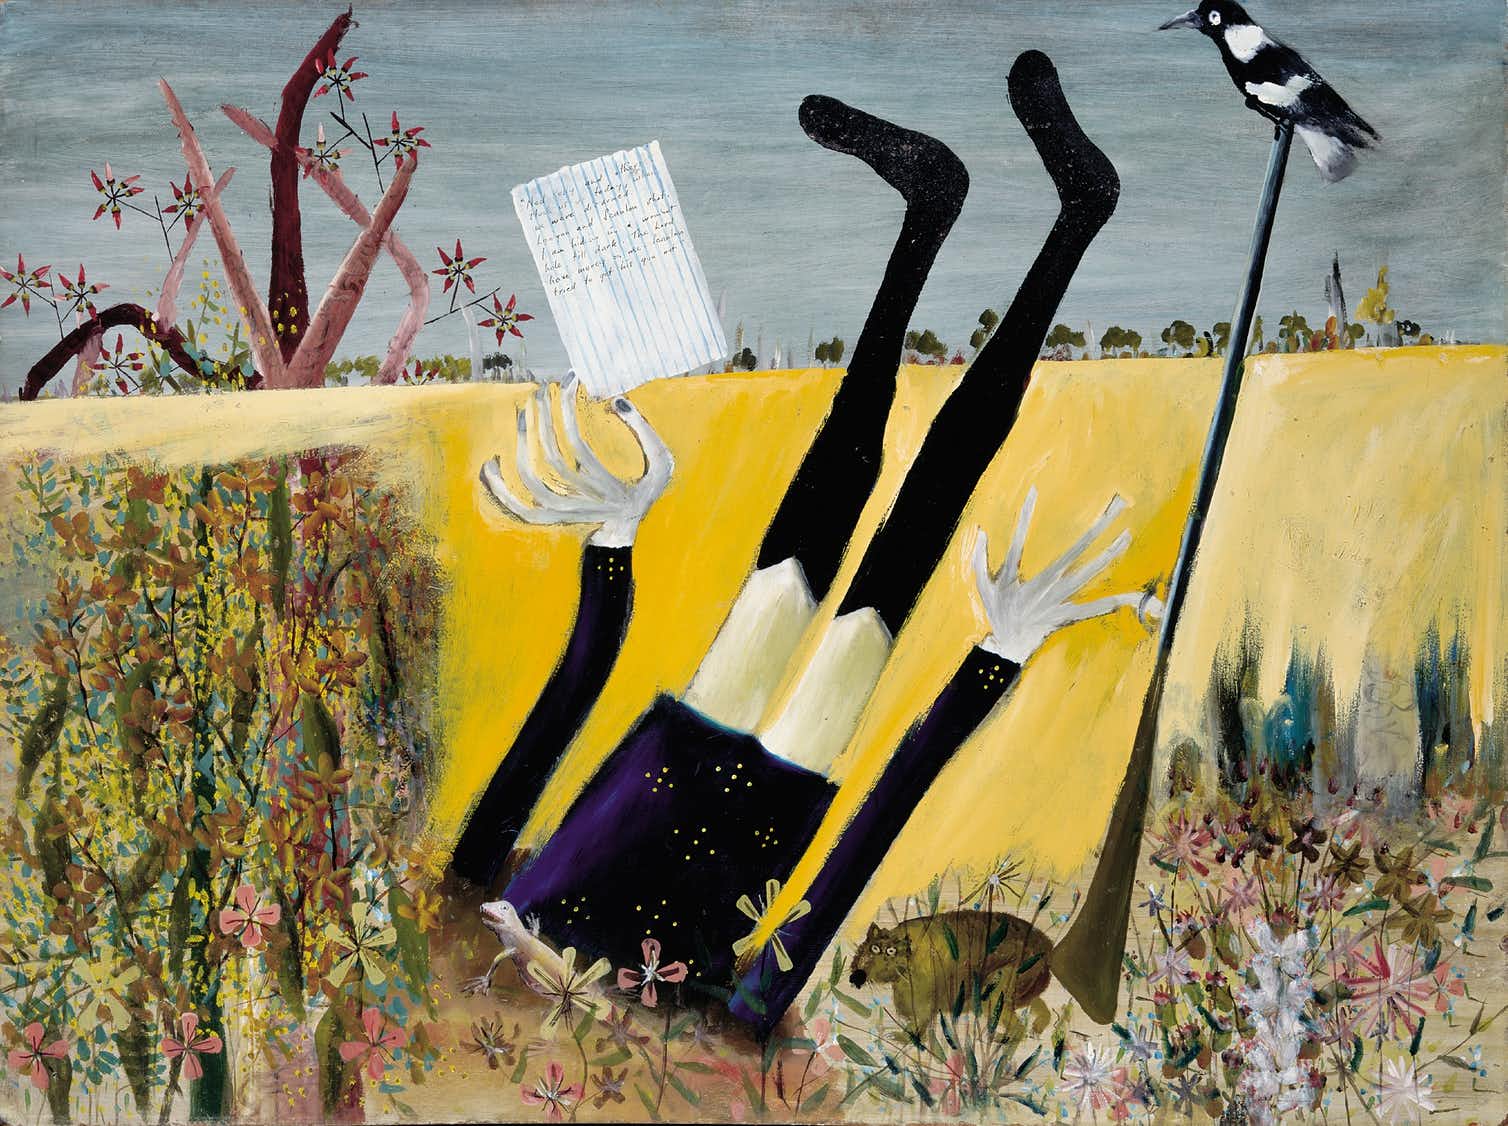 Sidney Nolan Policeman in a Wombat Hole 1946. Enamel on fibre board 91.8 x 122.3 cm. Canberra Museum and Gallery, Canberra. Gift of the artist to the people of Australia 1974. © Canberra Museum and Gallery